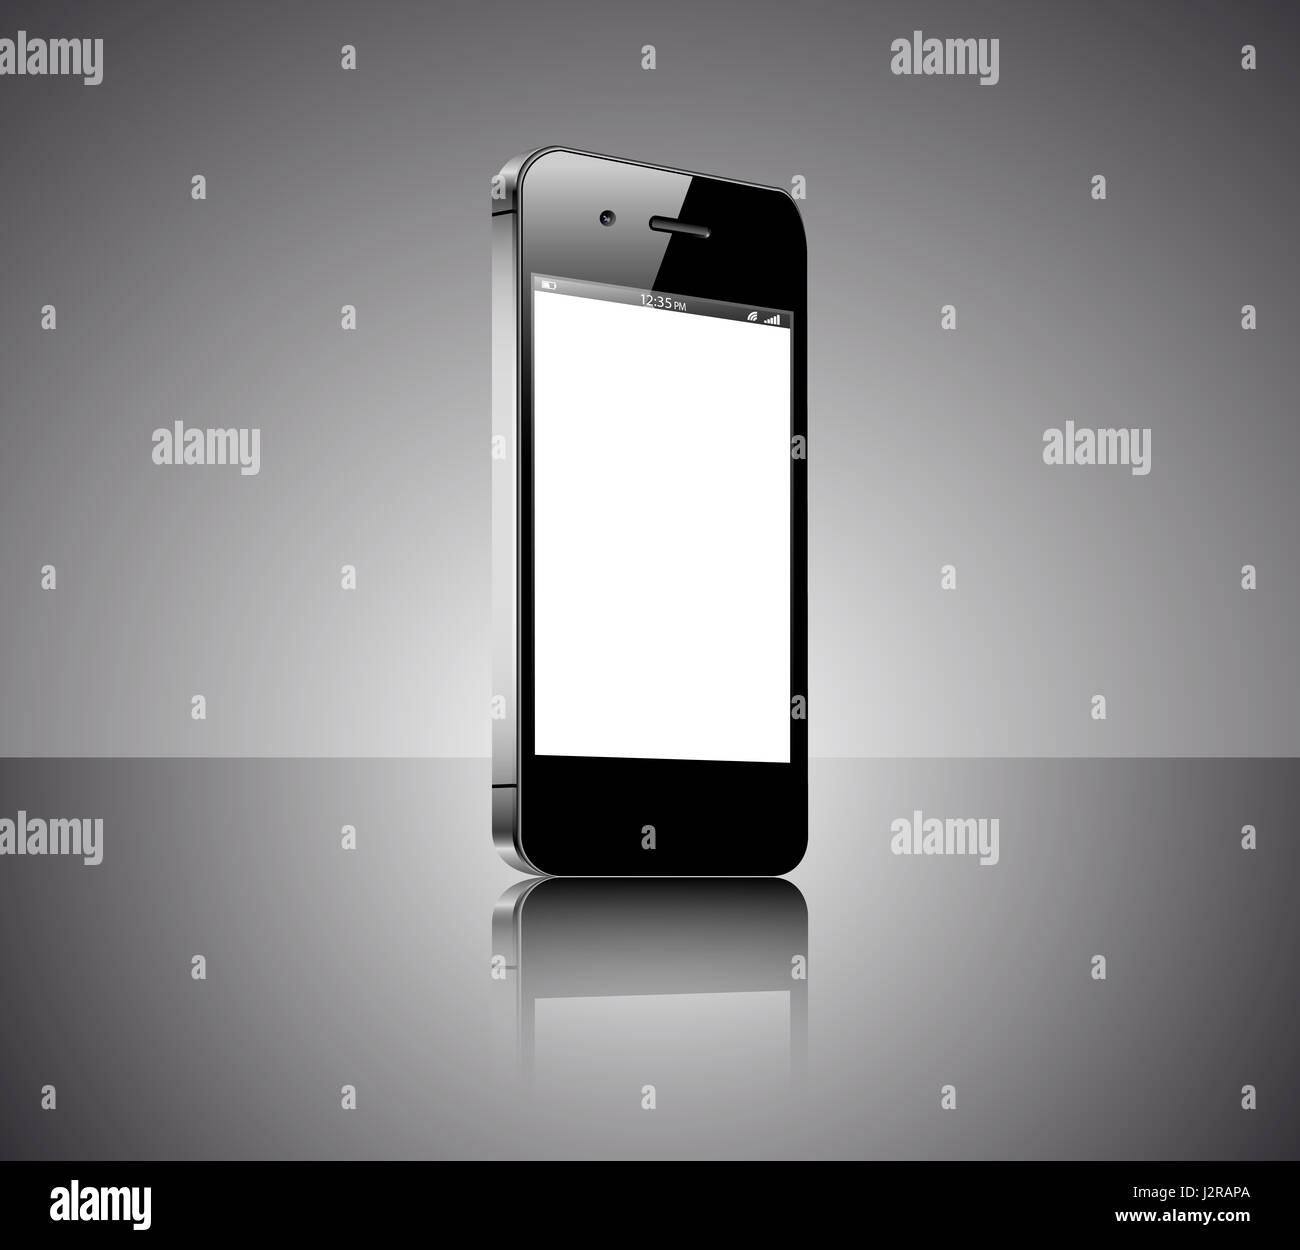 Realistic black smartphone with a white screen Stock Photo